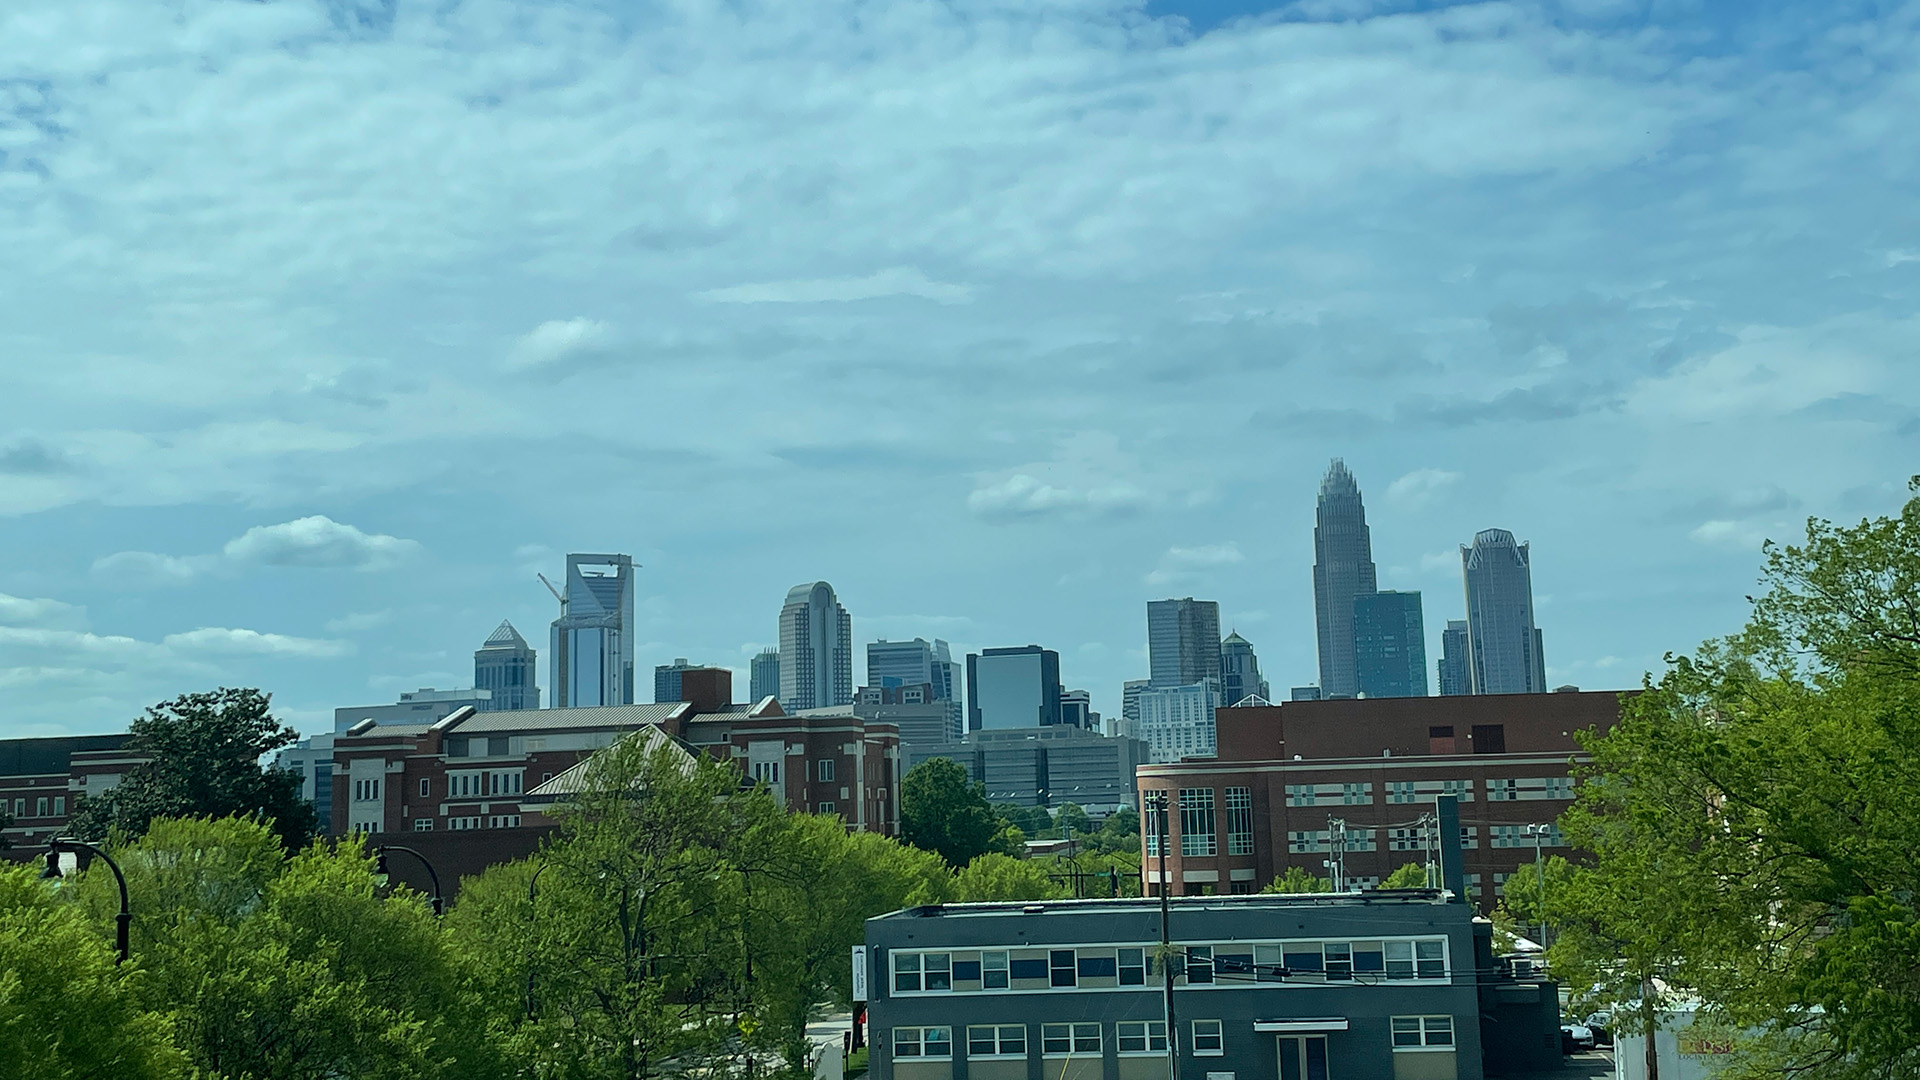 Image of the Uptown Charlotte City View from the suite